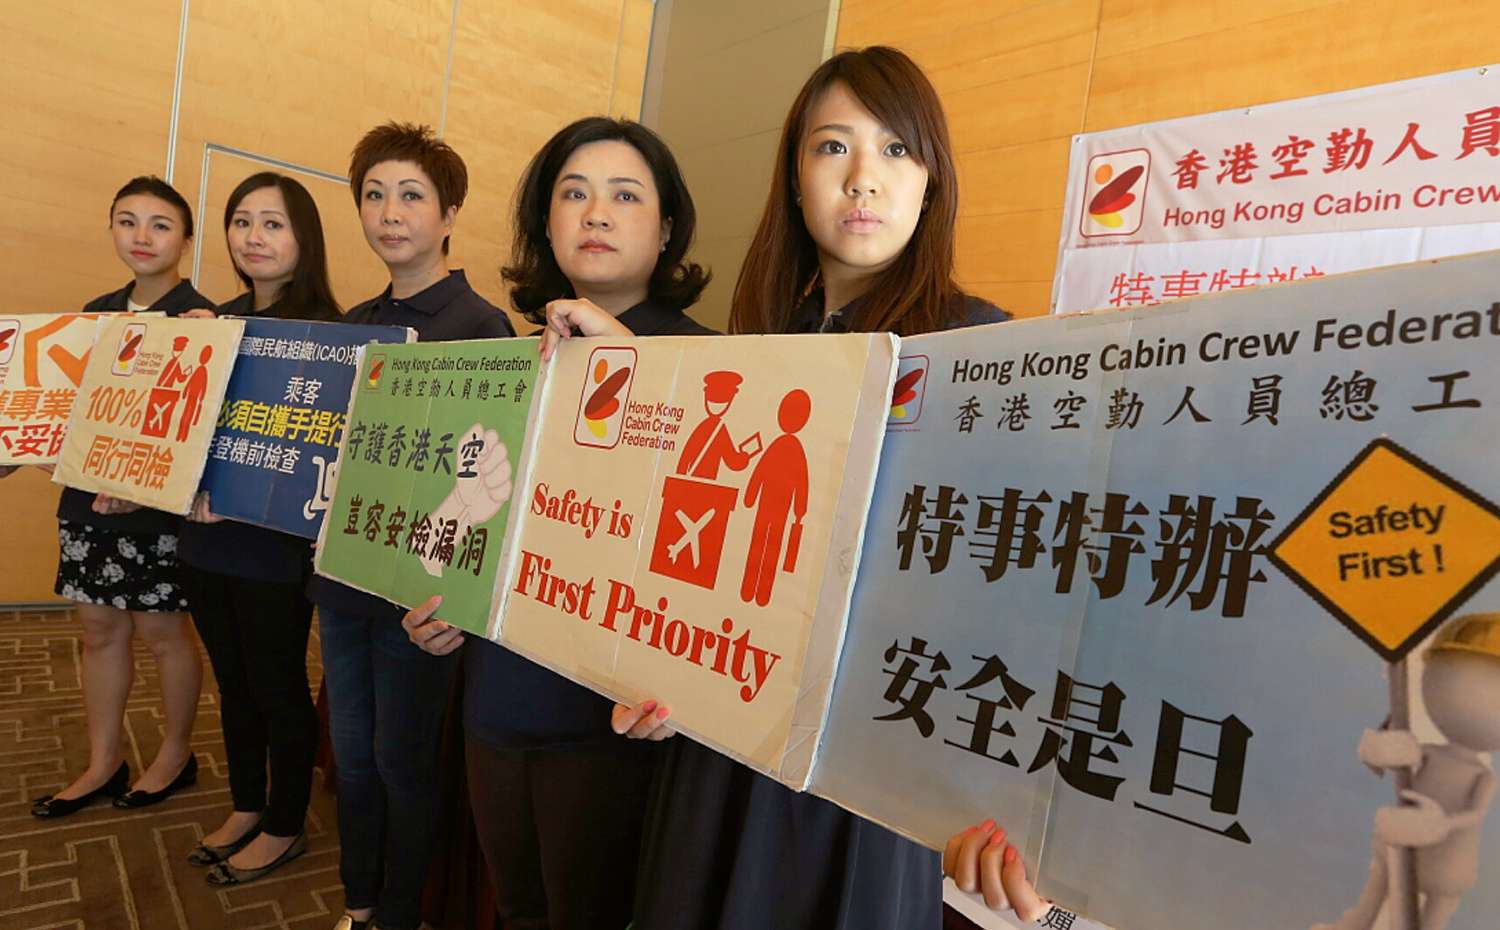 Carol Ng Man-yee (second from right) of the Hong Kong Cabin Crew Federation with fellow union members. Photo: Felix Wong